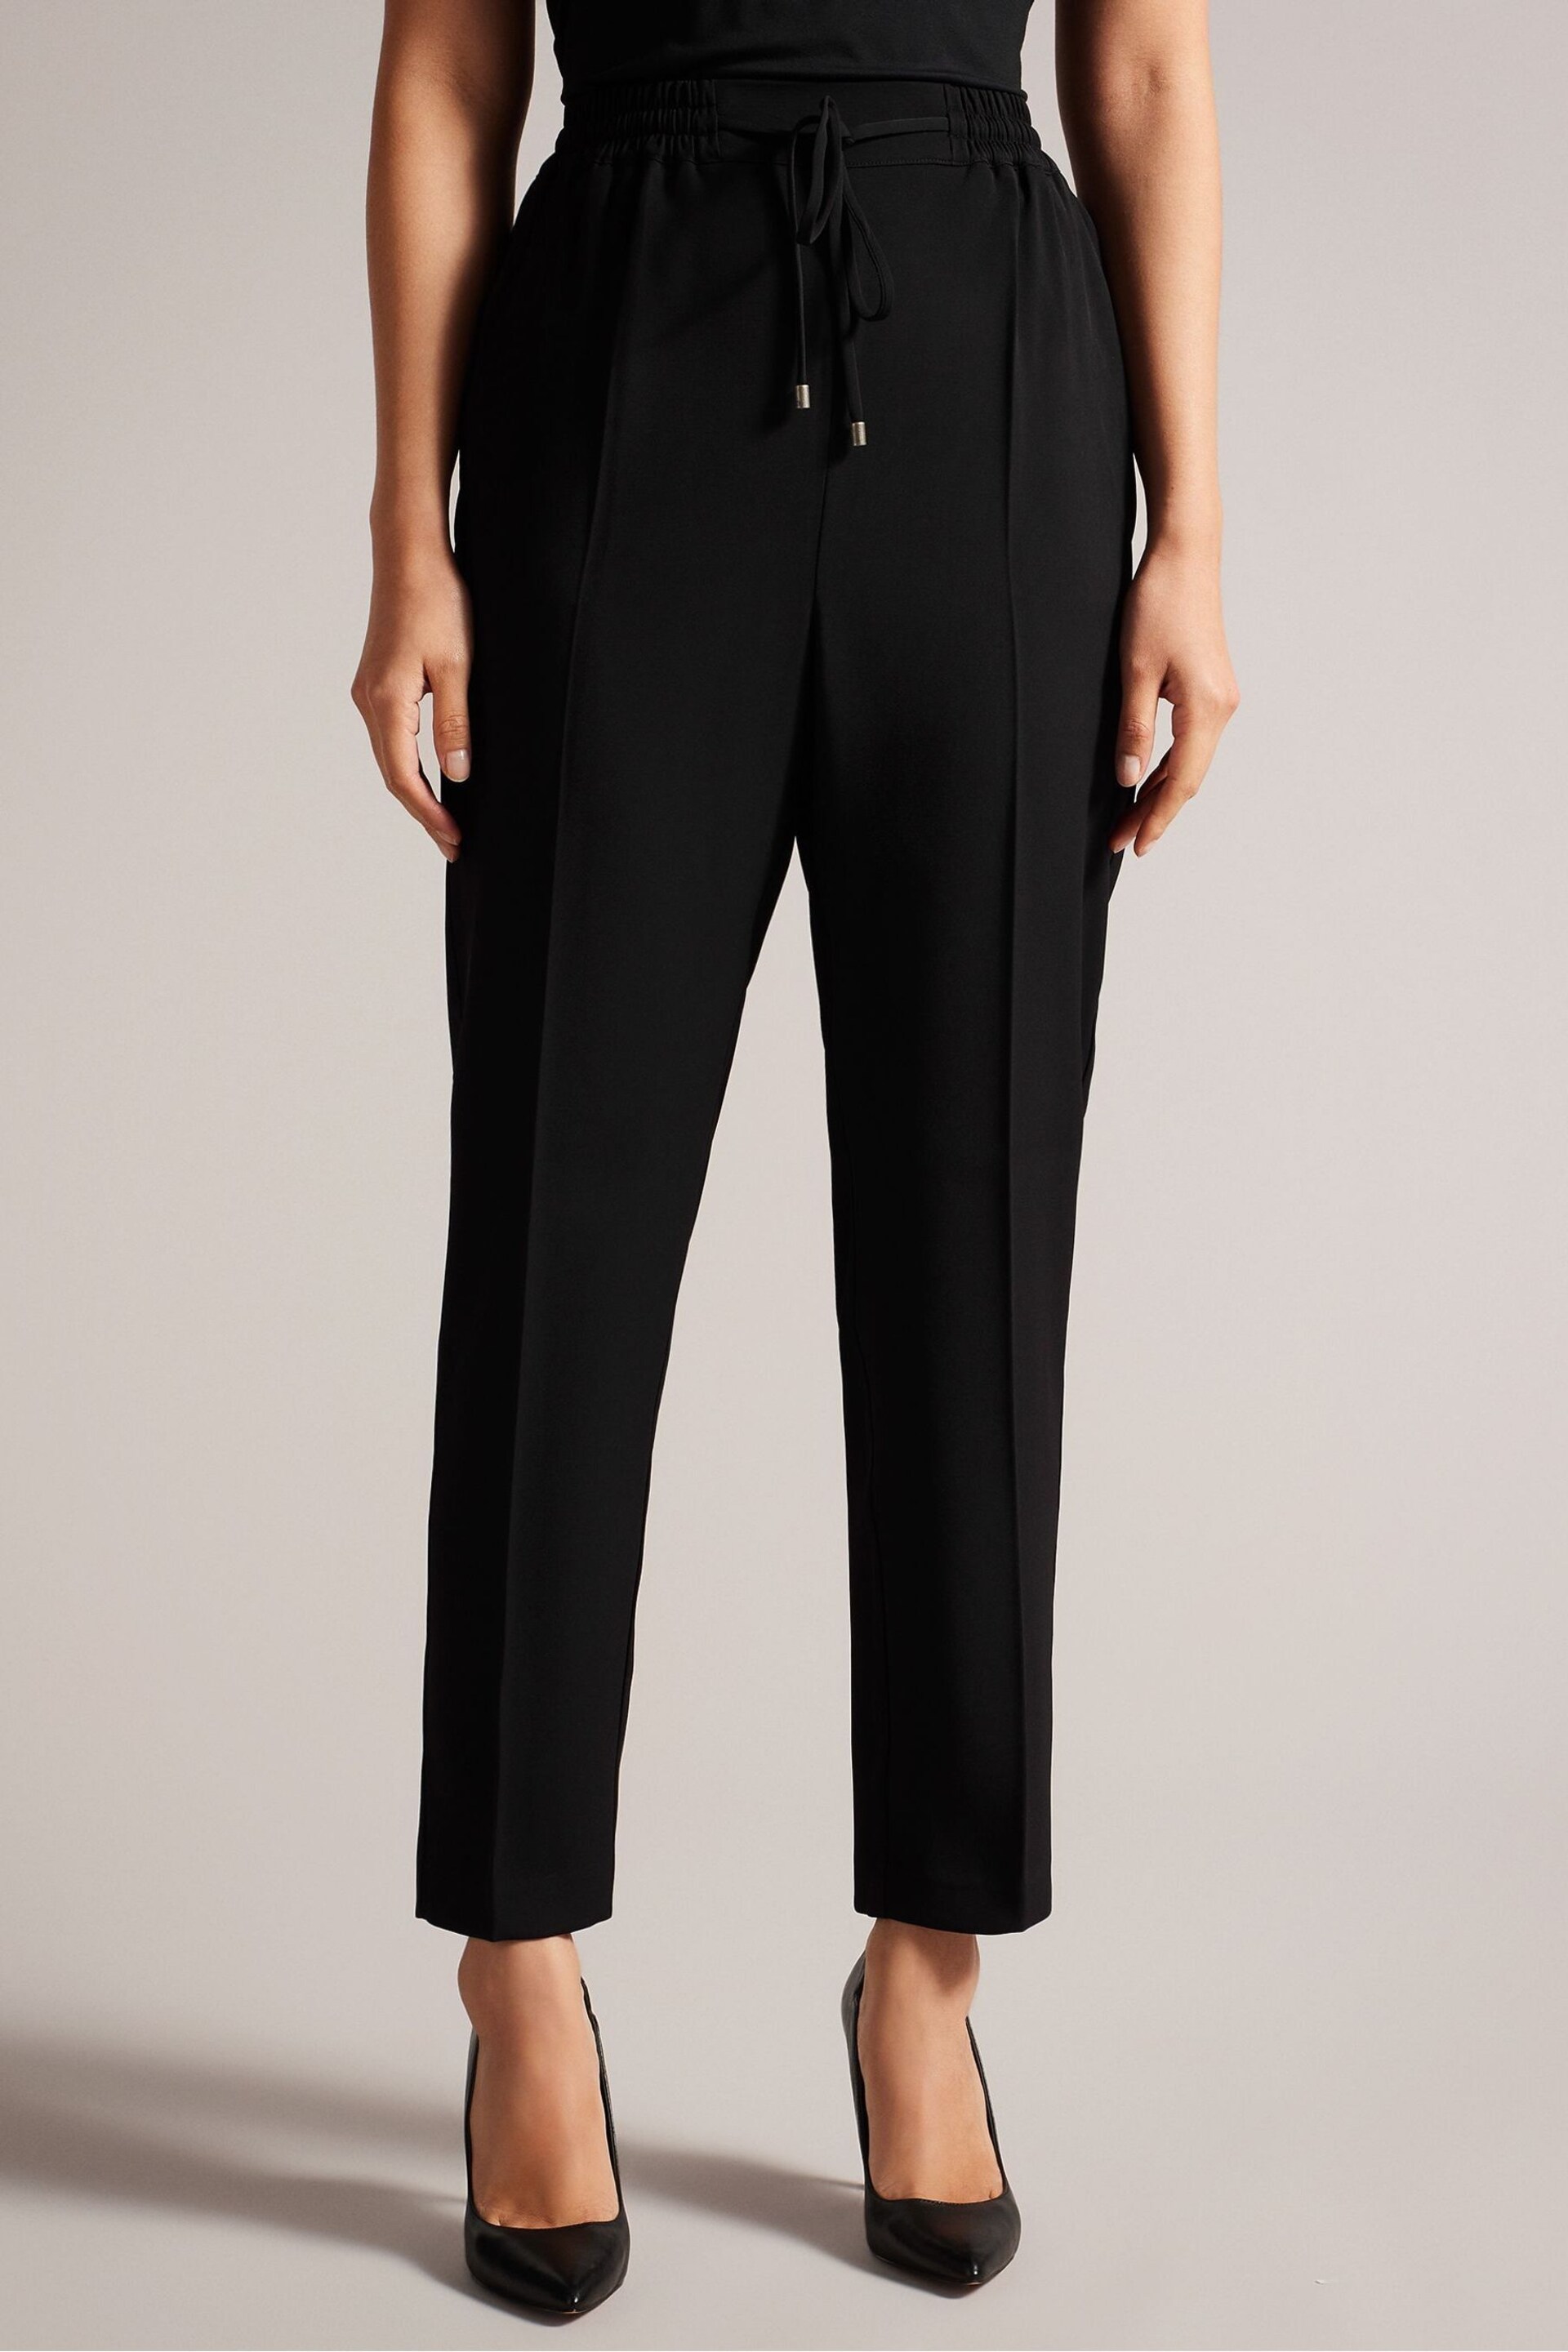 Ted Baker Black Slim Laurai Cut Ankle Length Joggers - Image 2 of 5